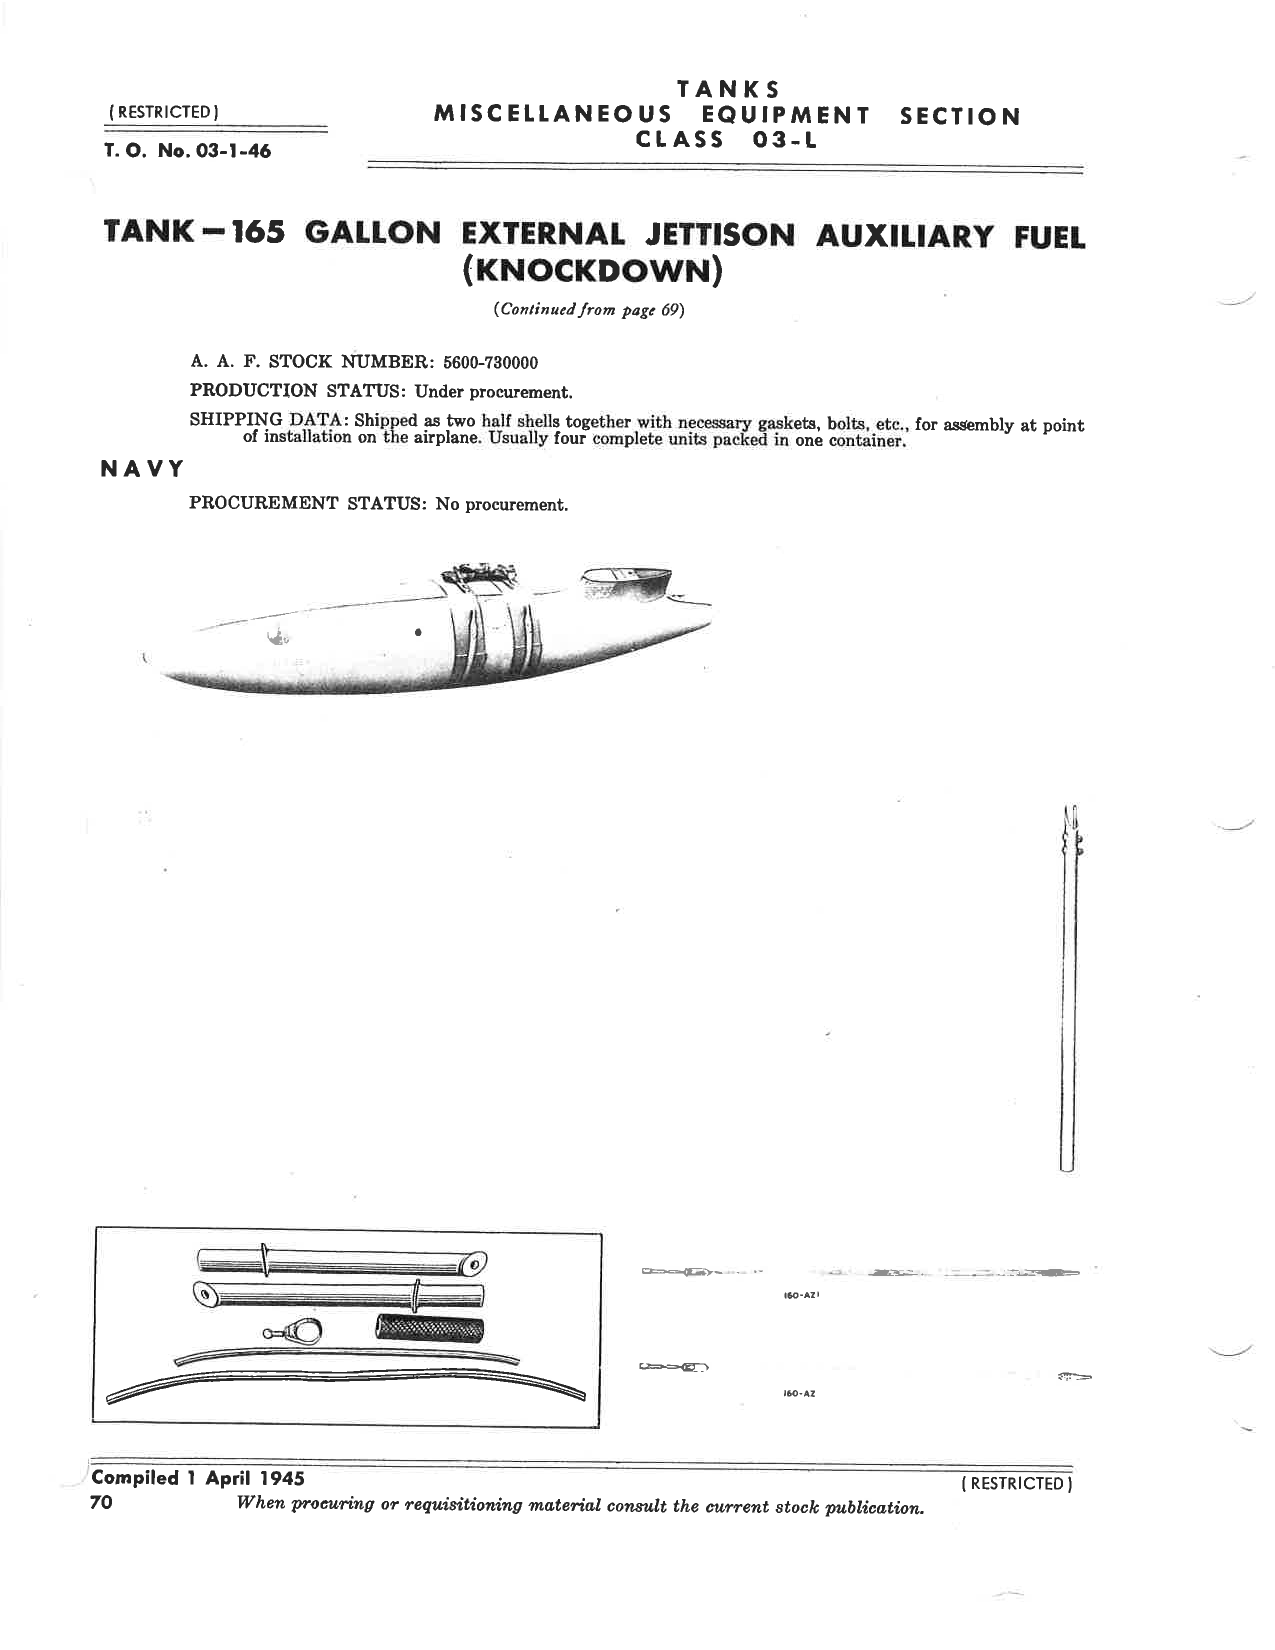 Sample page 7 from AirCorps Library document: Tanks - Misc Equipment Section - Class 03-L